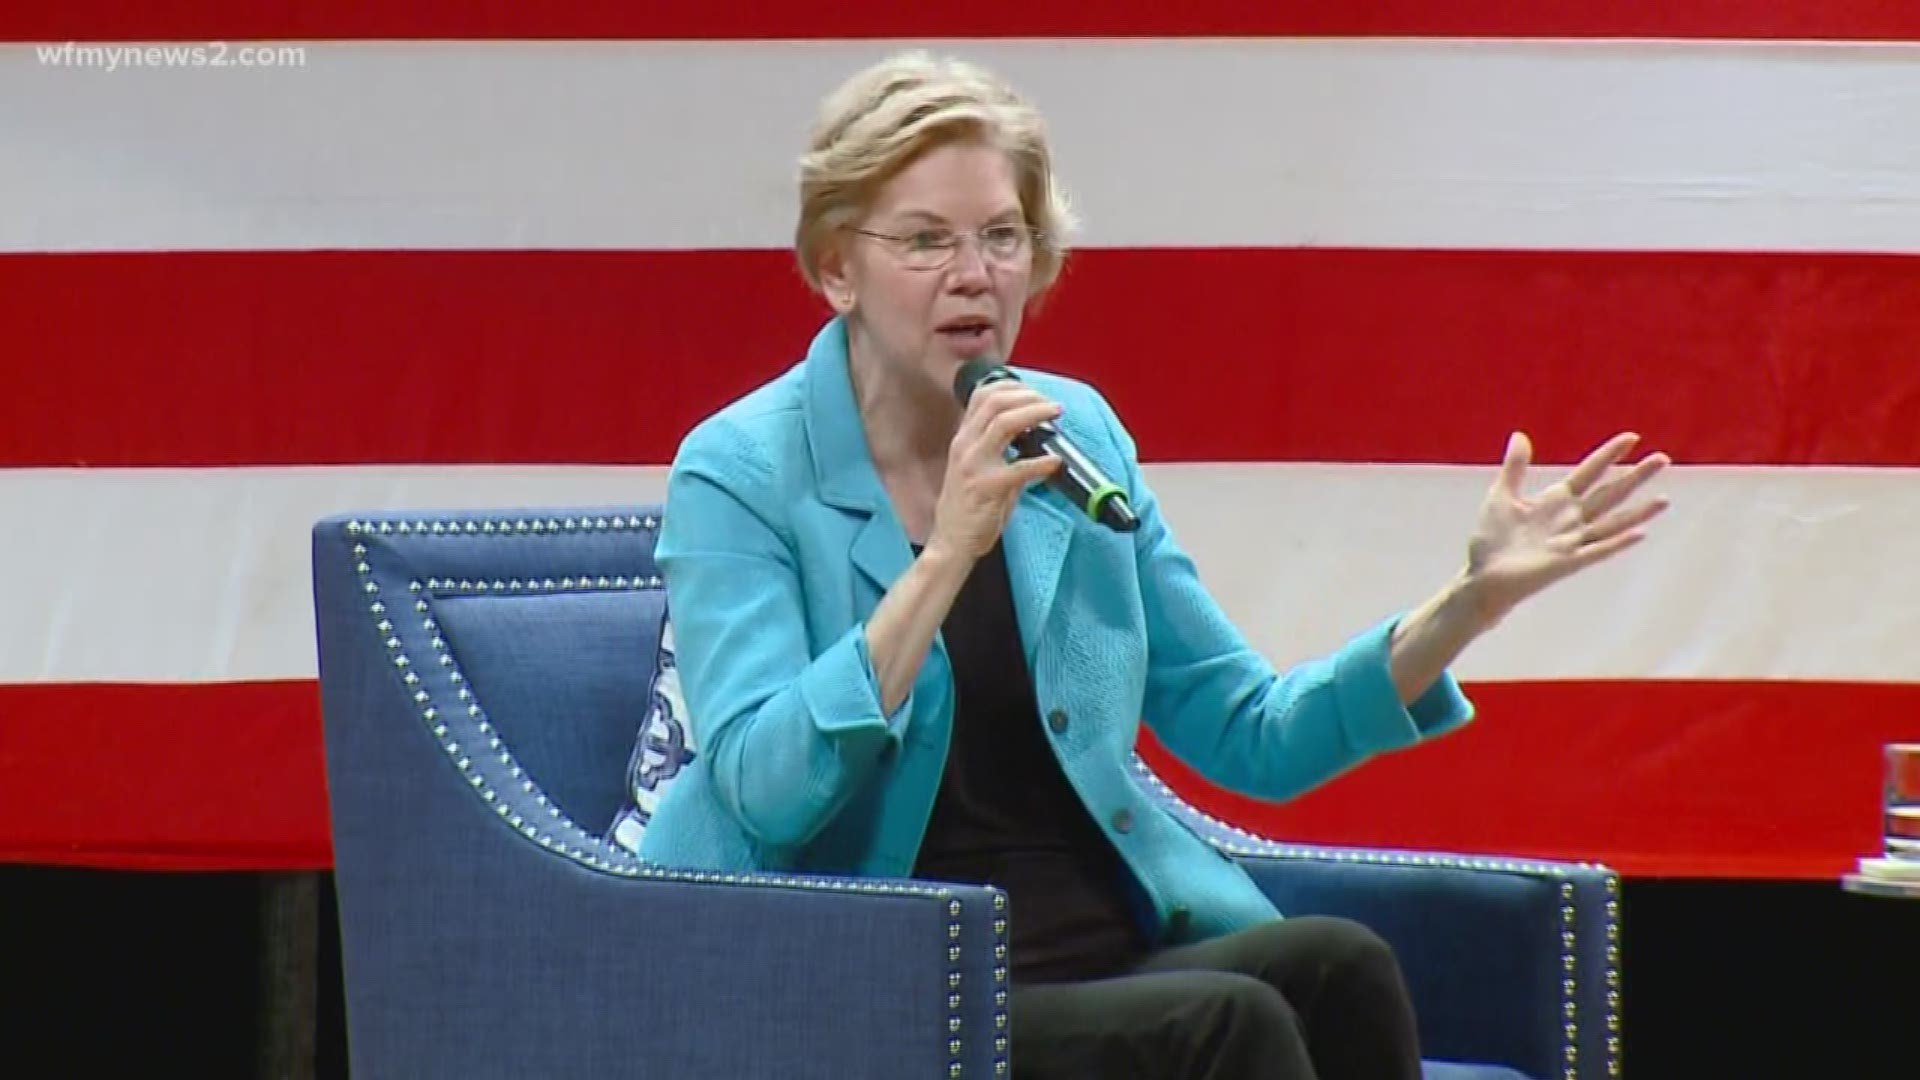 The Elizabeth Warren Campaign tells WFMY News 2 they want to talk about "how to level the playing field for working families, and who is best to lead that fight."